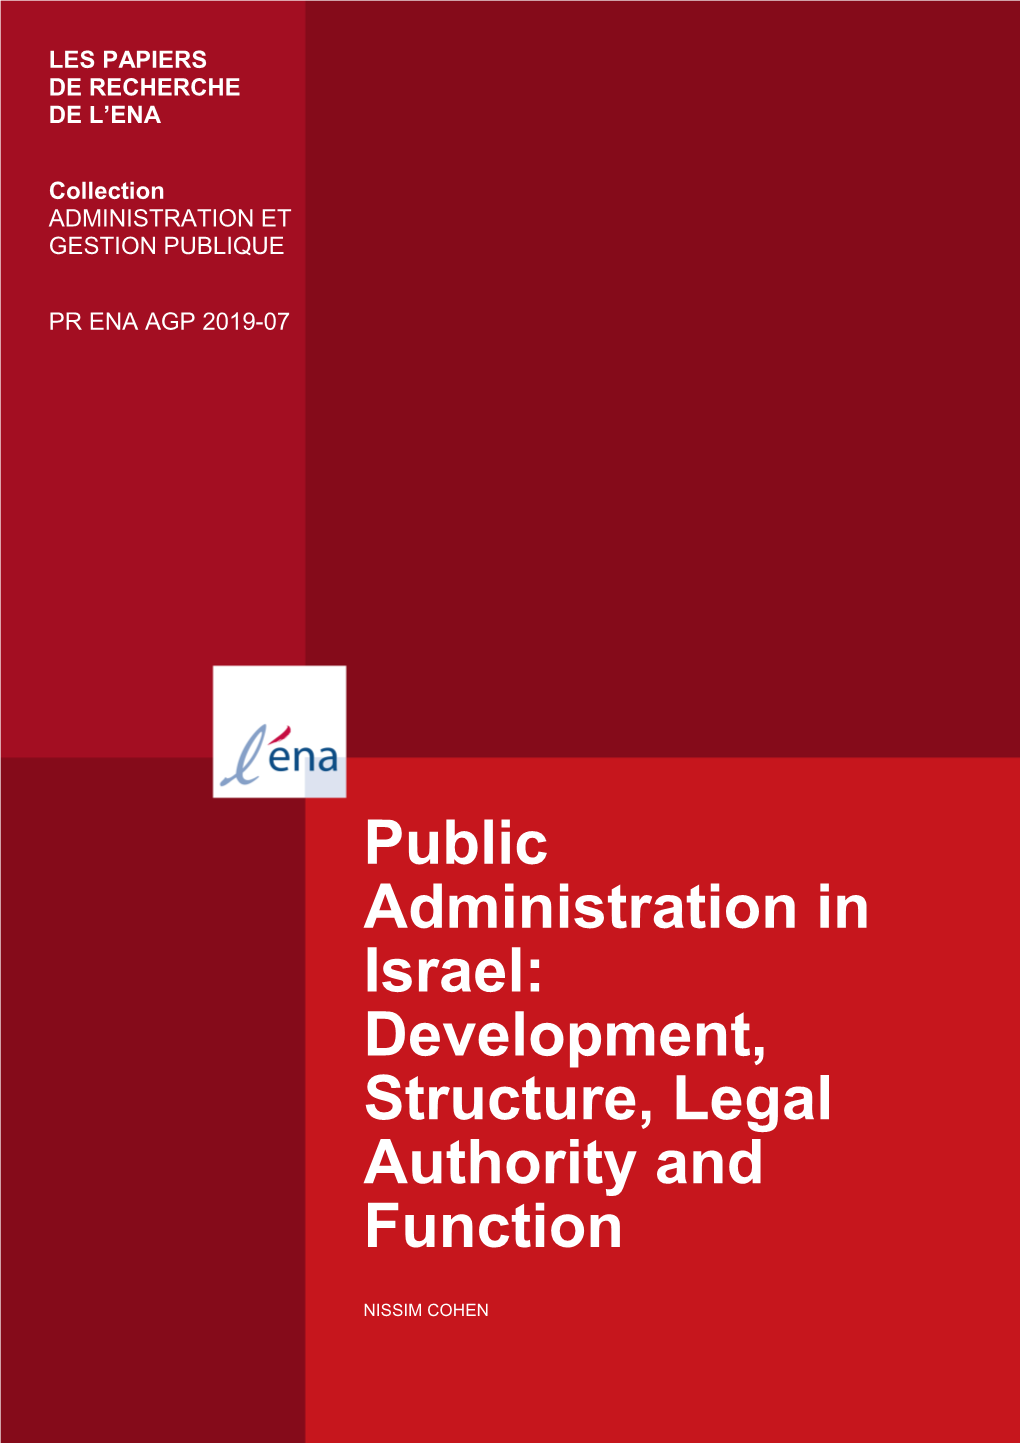 Public Administration in Israel: Development, Structure, Legal Authority and Function